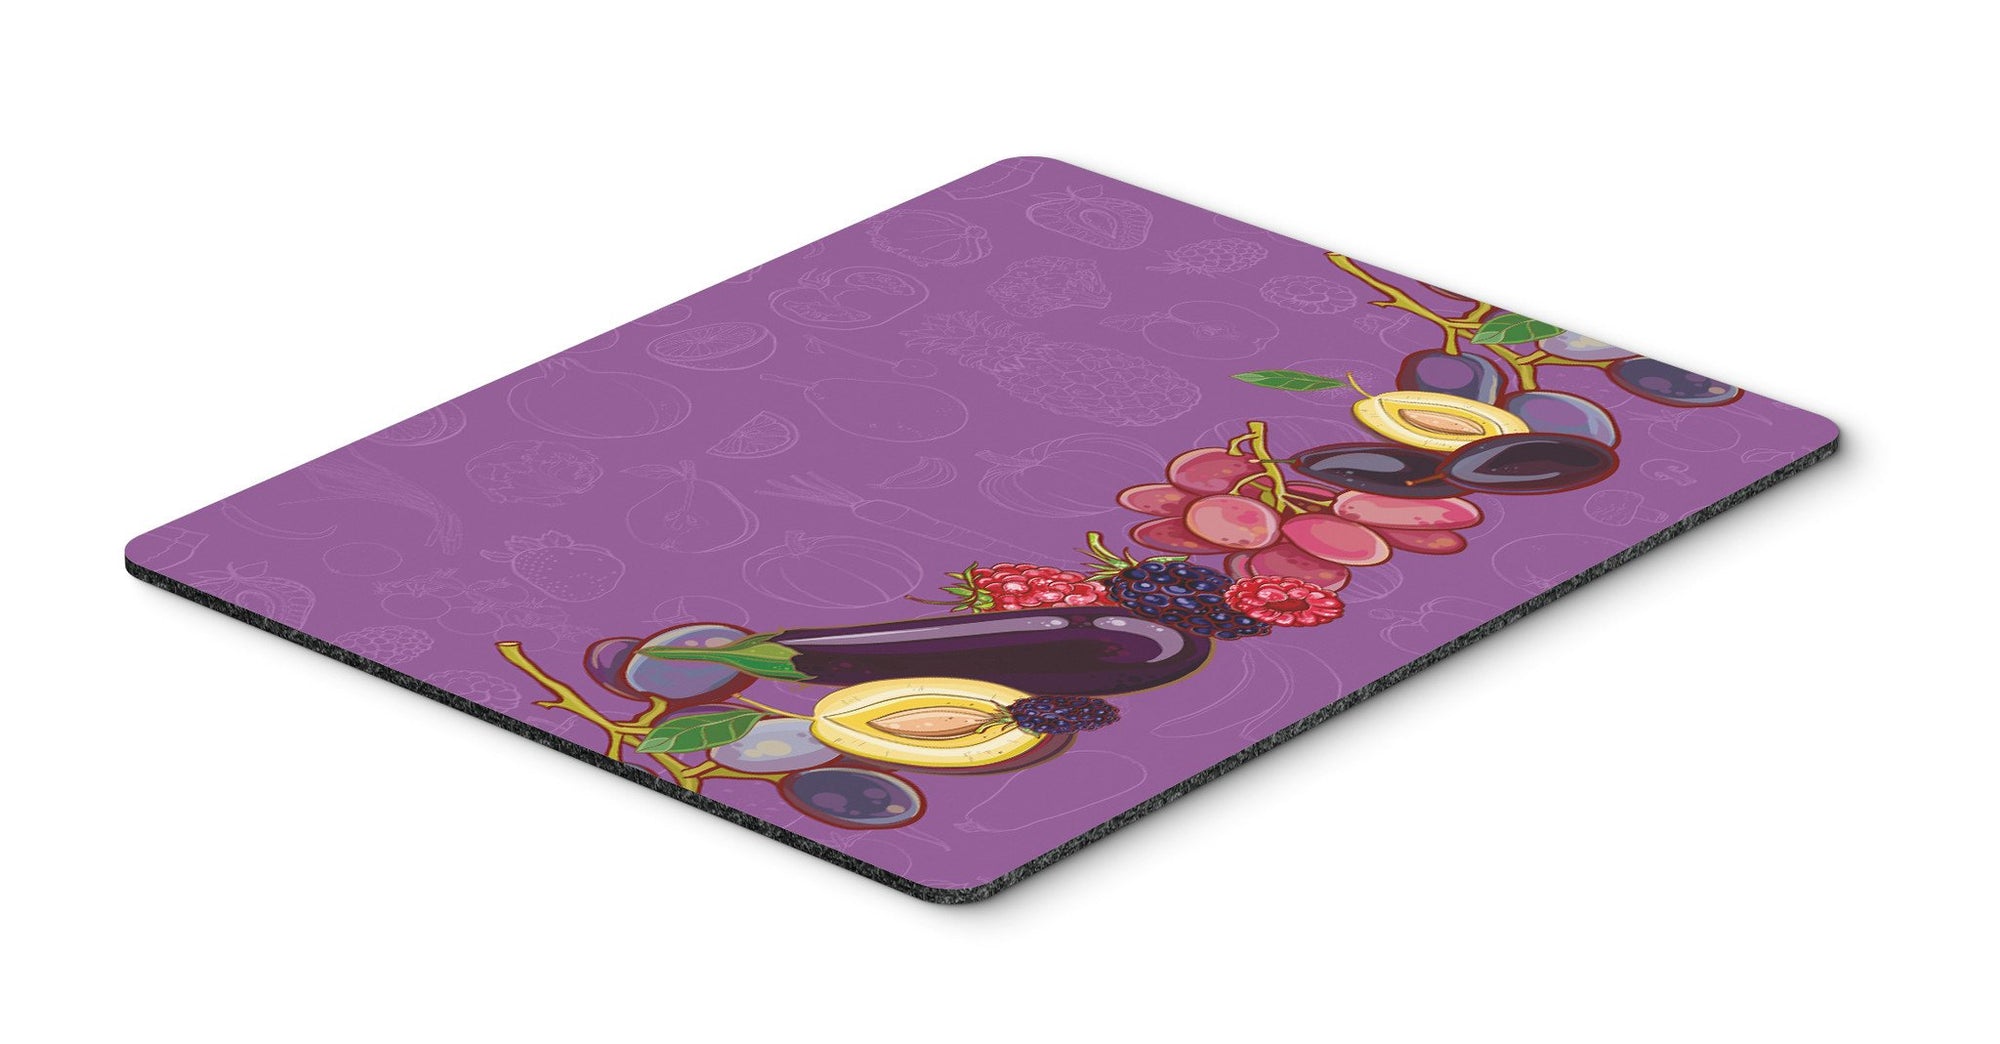 Fruits and Vegetables in Purple Mouse Pad, Hot Pad or Trivet BB5132MP by Caroline's Treasures